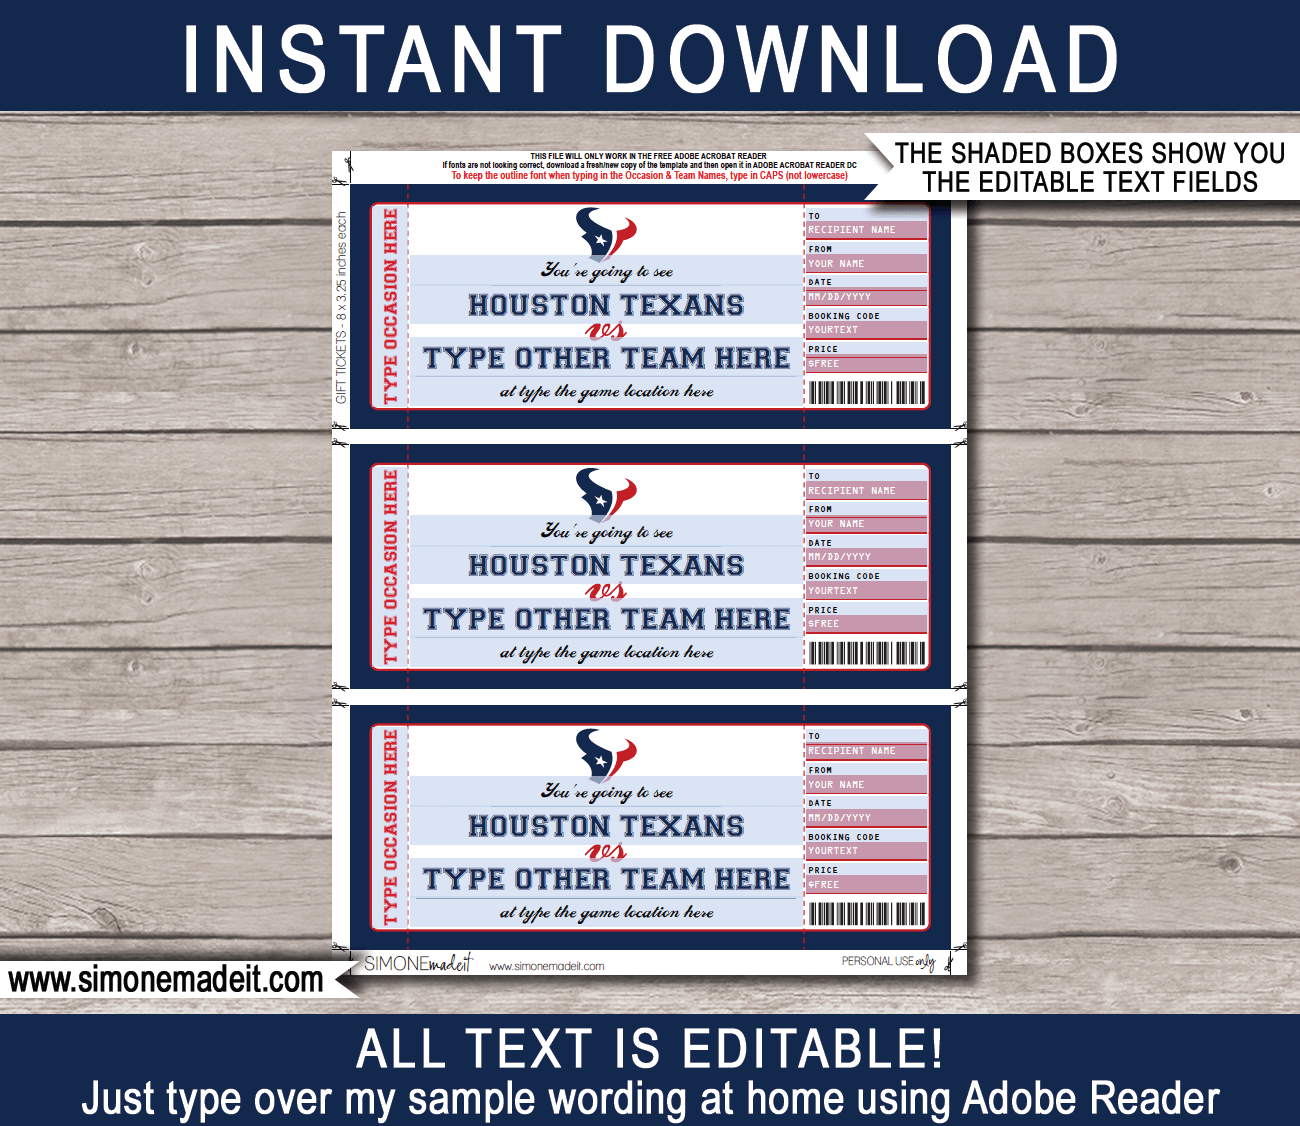 texans game tickets